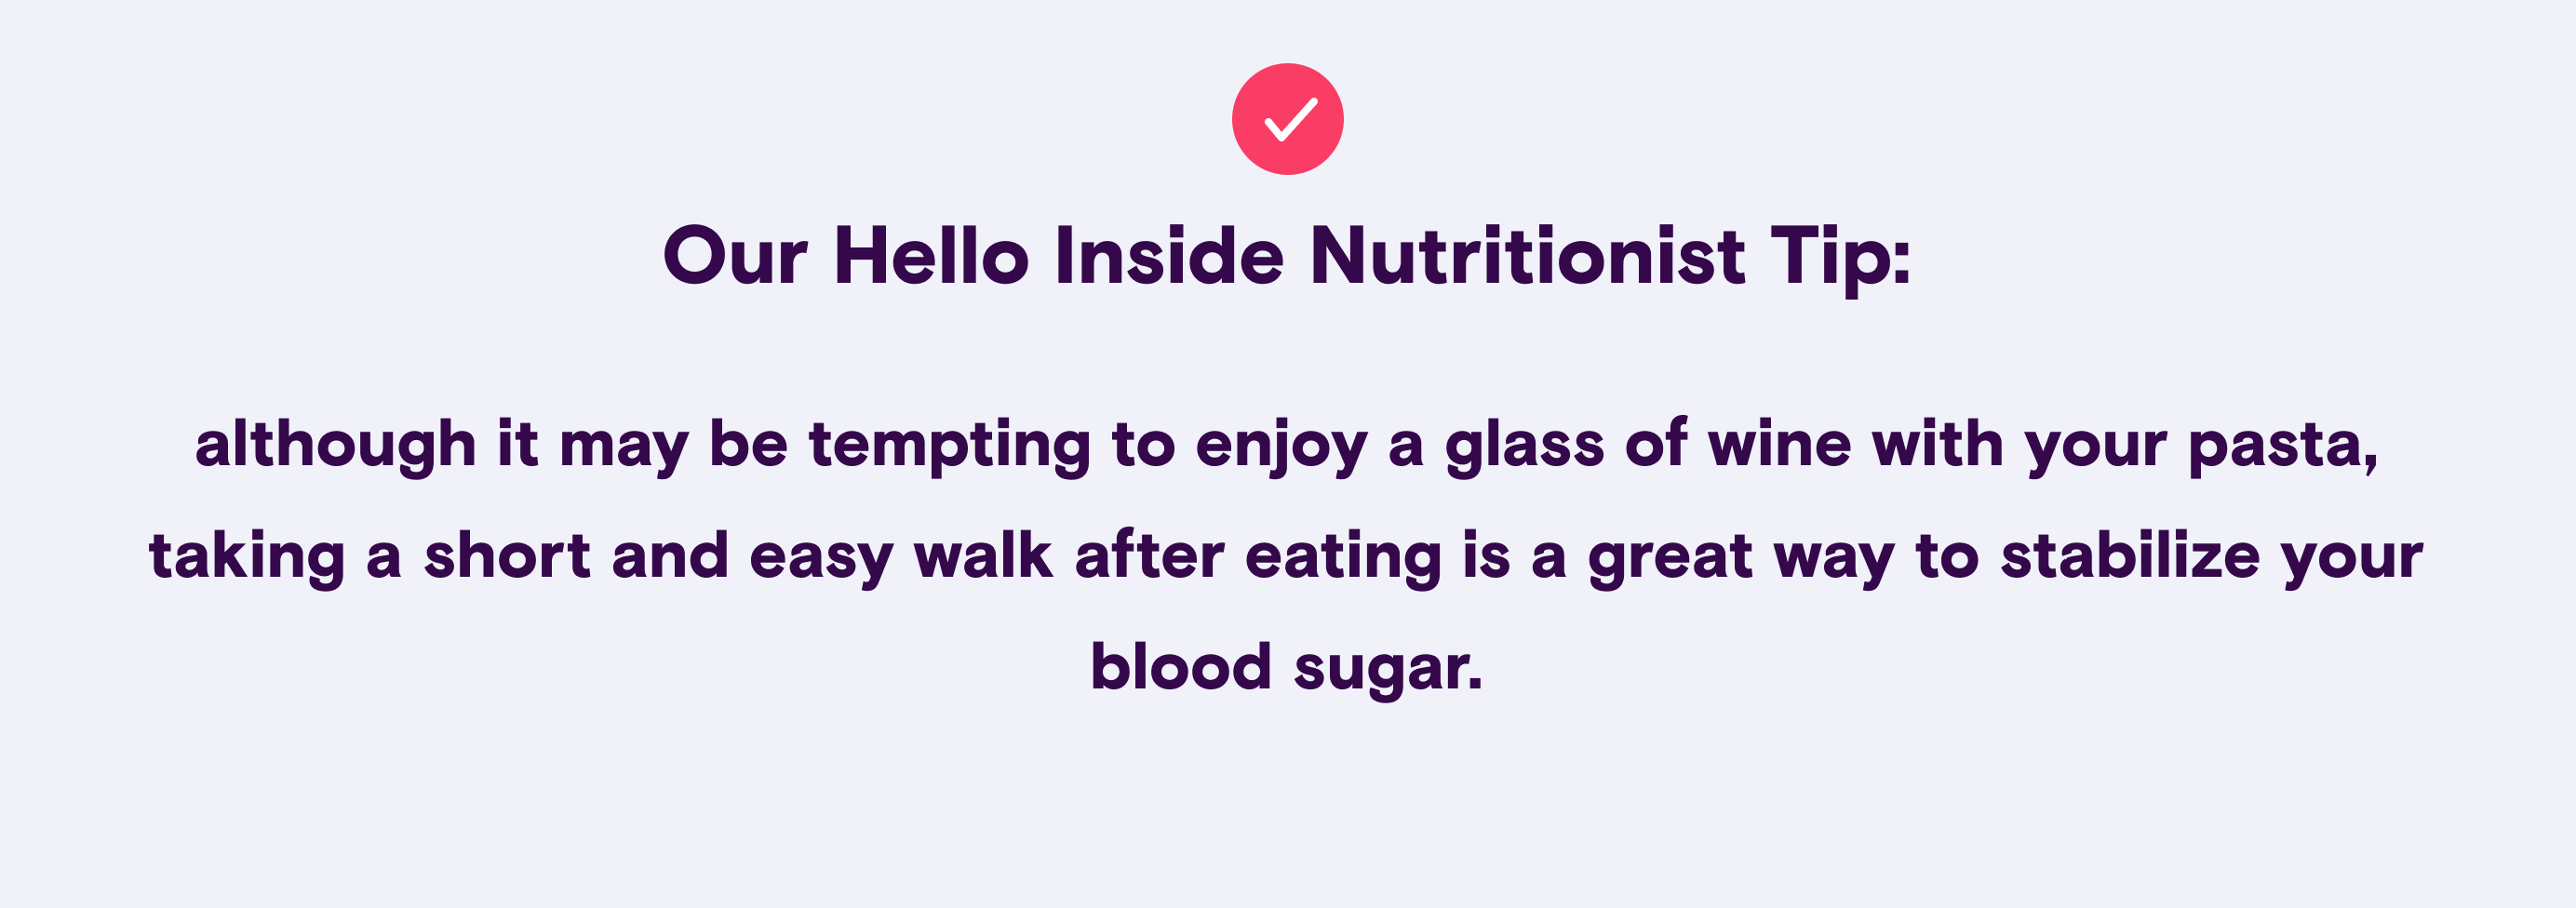 Our Hello Inside nutritionist tip: